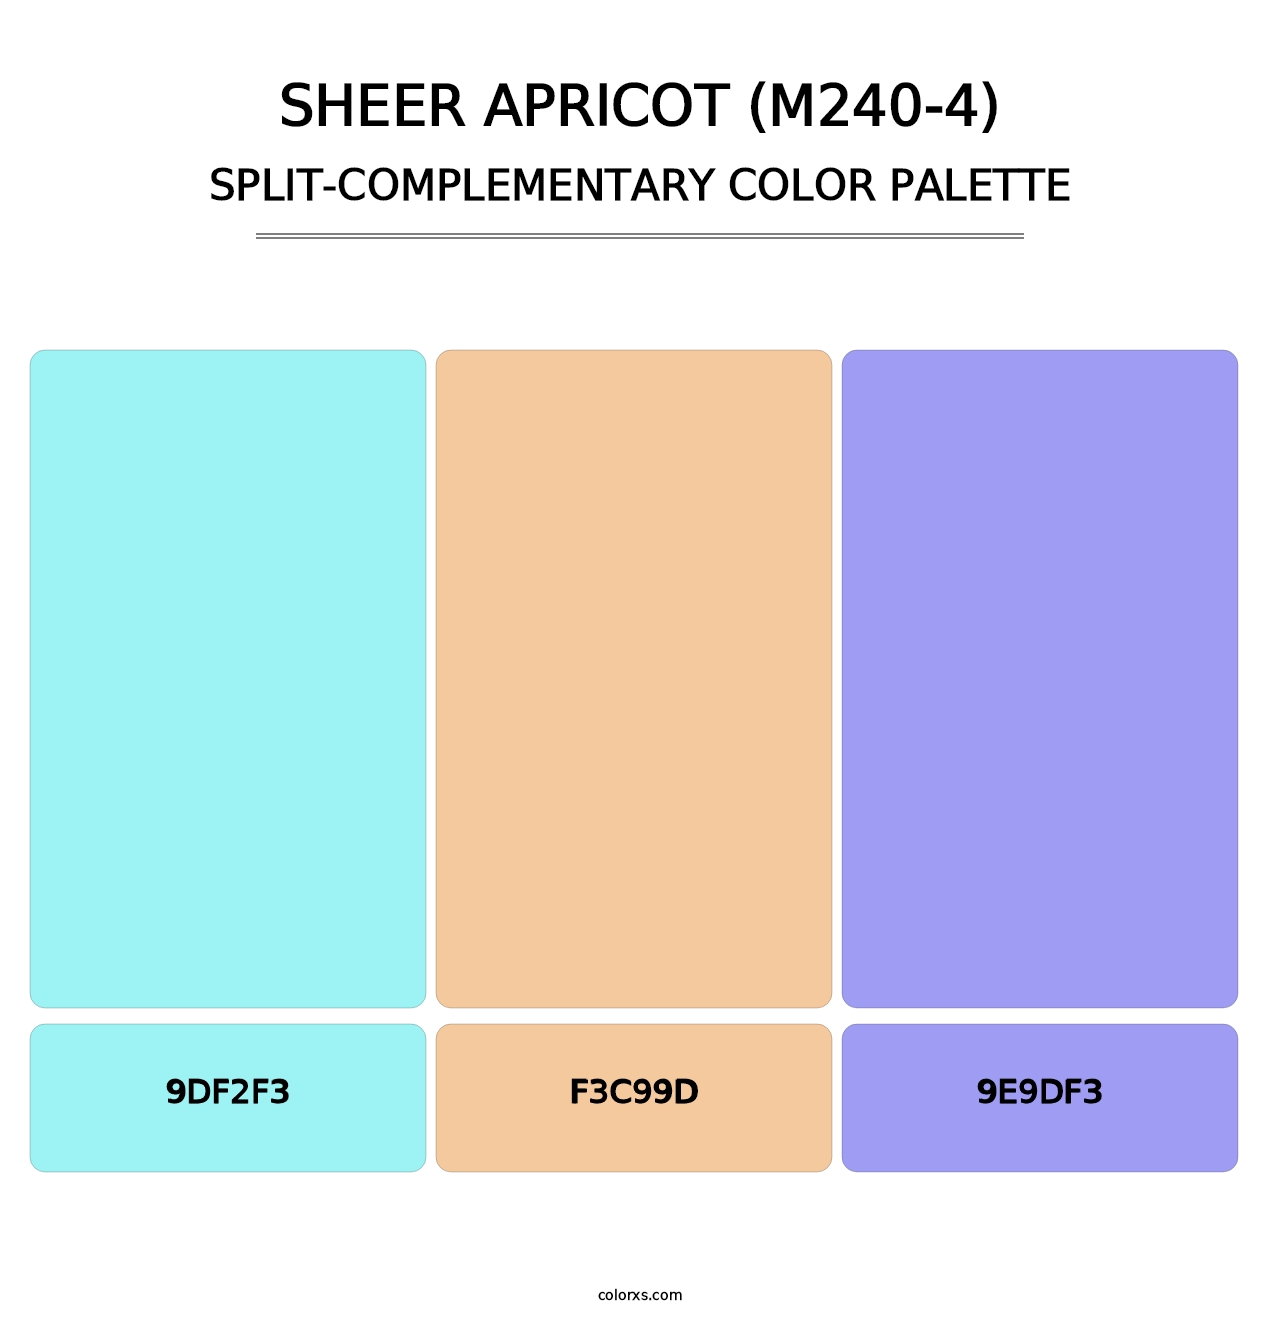 Sheer Apricot (M240-4) - Split-Complementary Color Palette